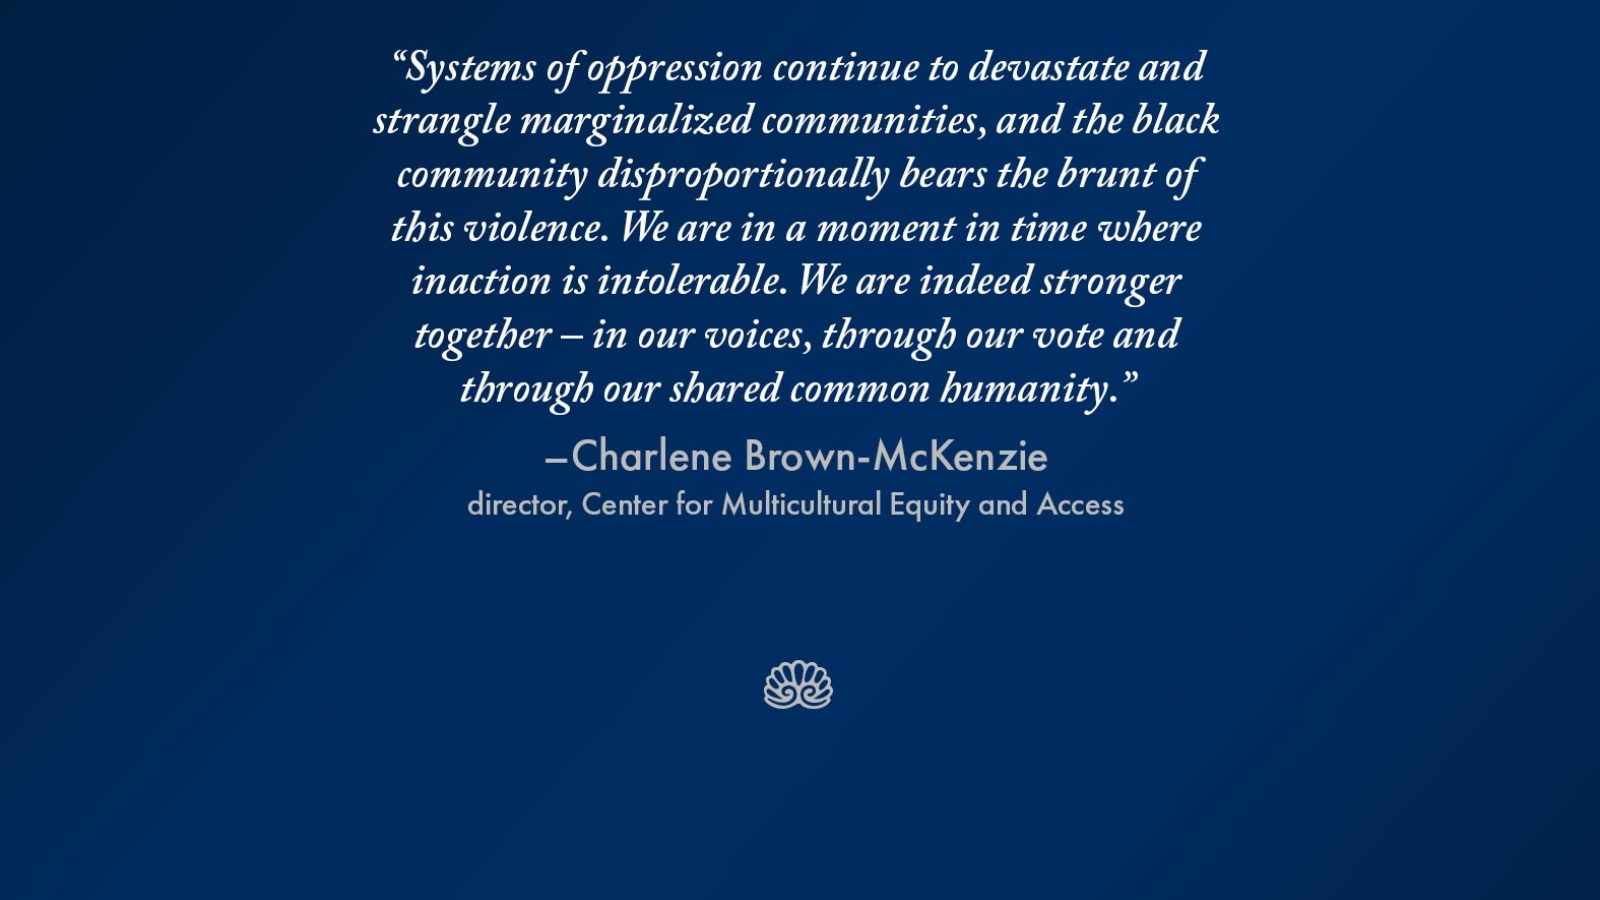 Graphic that reads &quot;Systems of oppression continue to devastate and strangle marginalized communities, and the black community disproportionally bears the brunt of this violence. We are in a moment in time where inaction is intolerable. We are indeed strong together – in our voices, through our vote and through our shared common humanity.&quot; - Charlene Brown-McKenzie, director, Center for Multicultural Equity and Access